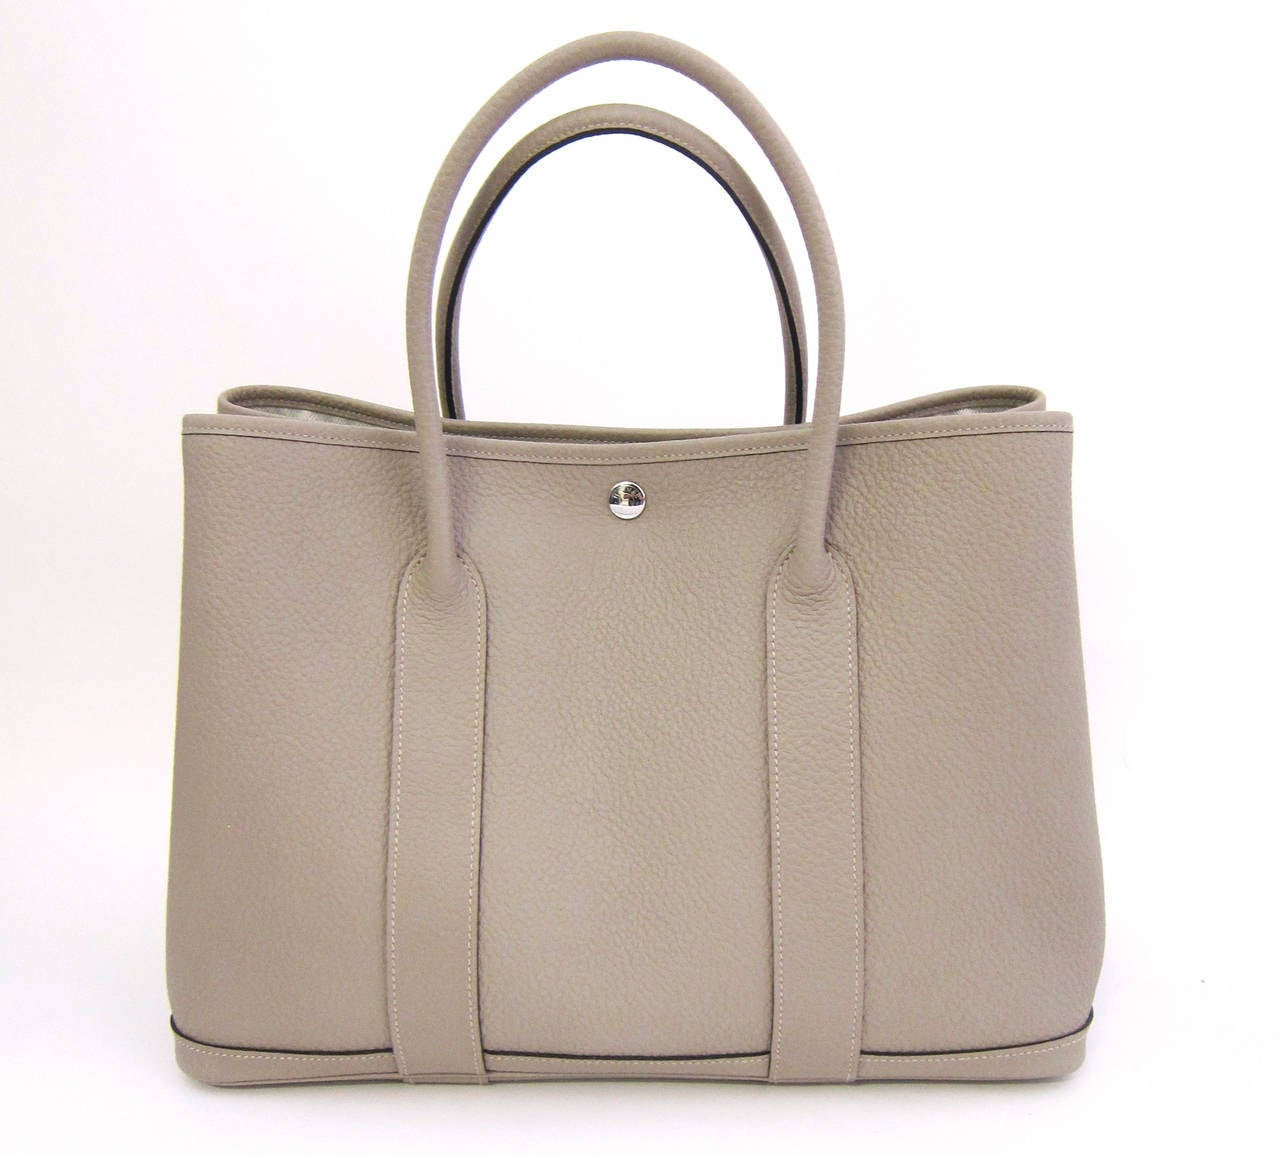 Hermes Garden Party Bag 36cm with Gold Original Country Leather